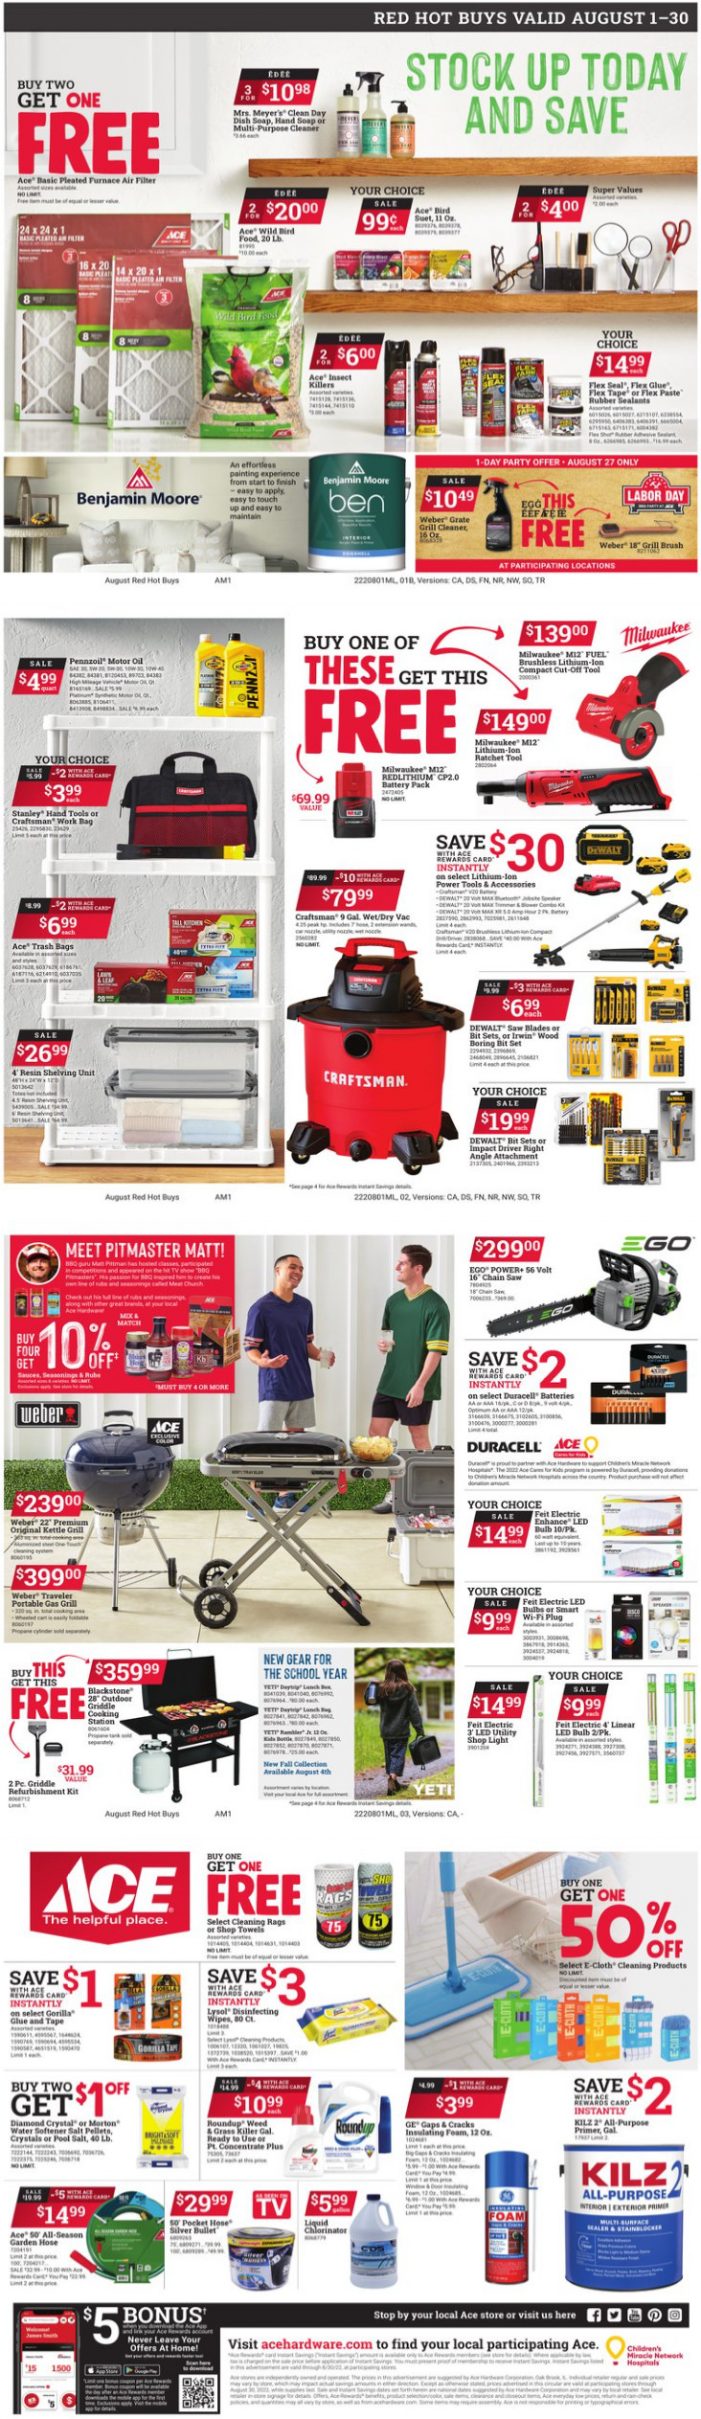 Your Sender’s Market Ace Hardware August Red Hot Buys